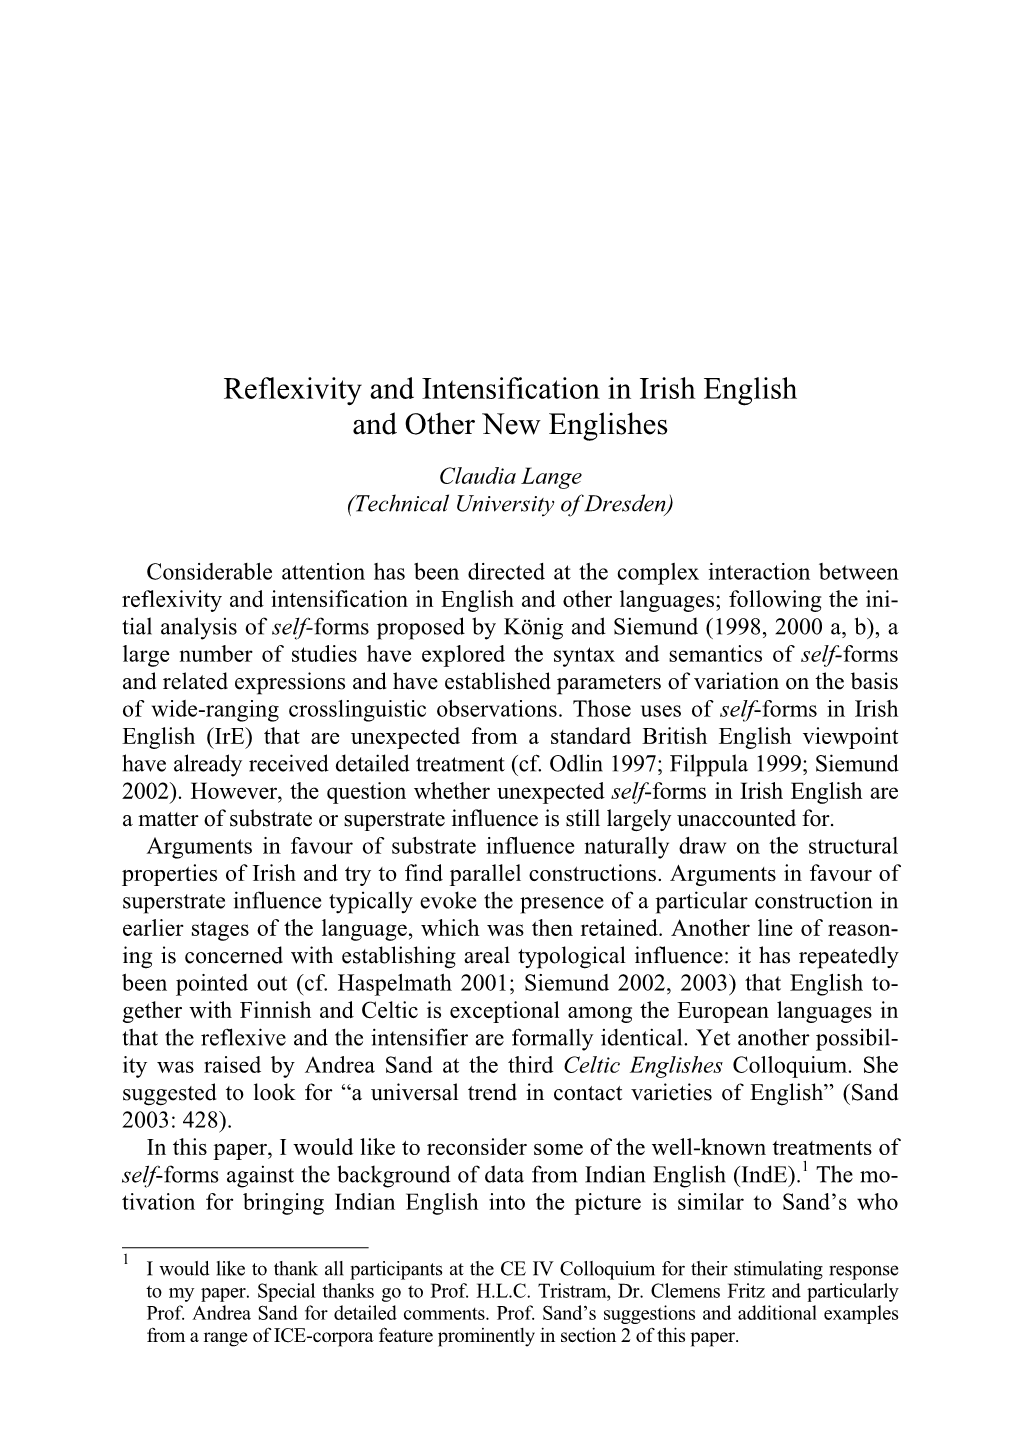 Reflexivity and Intensification in Irish English and Other New Englishes